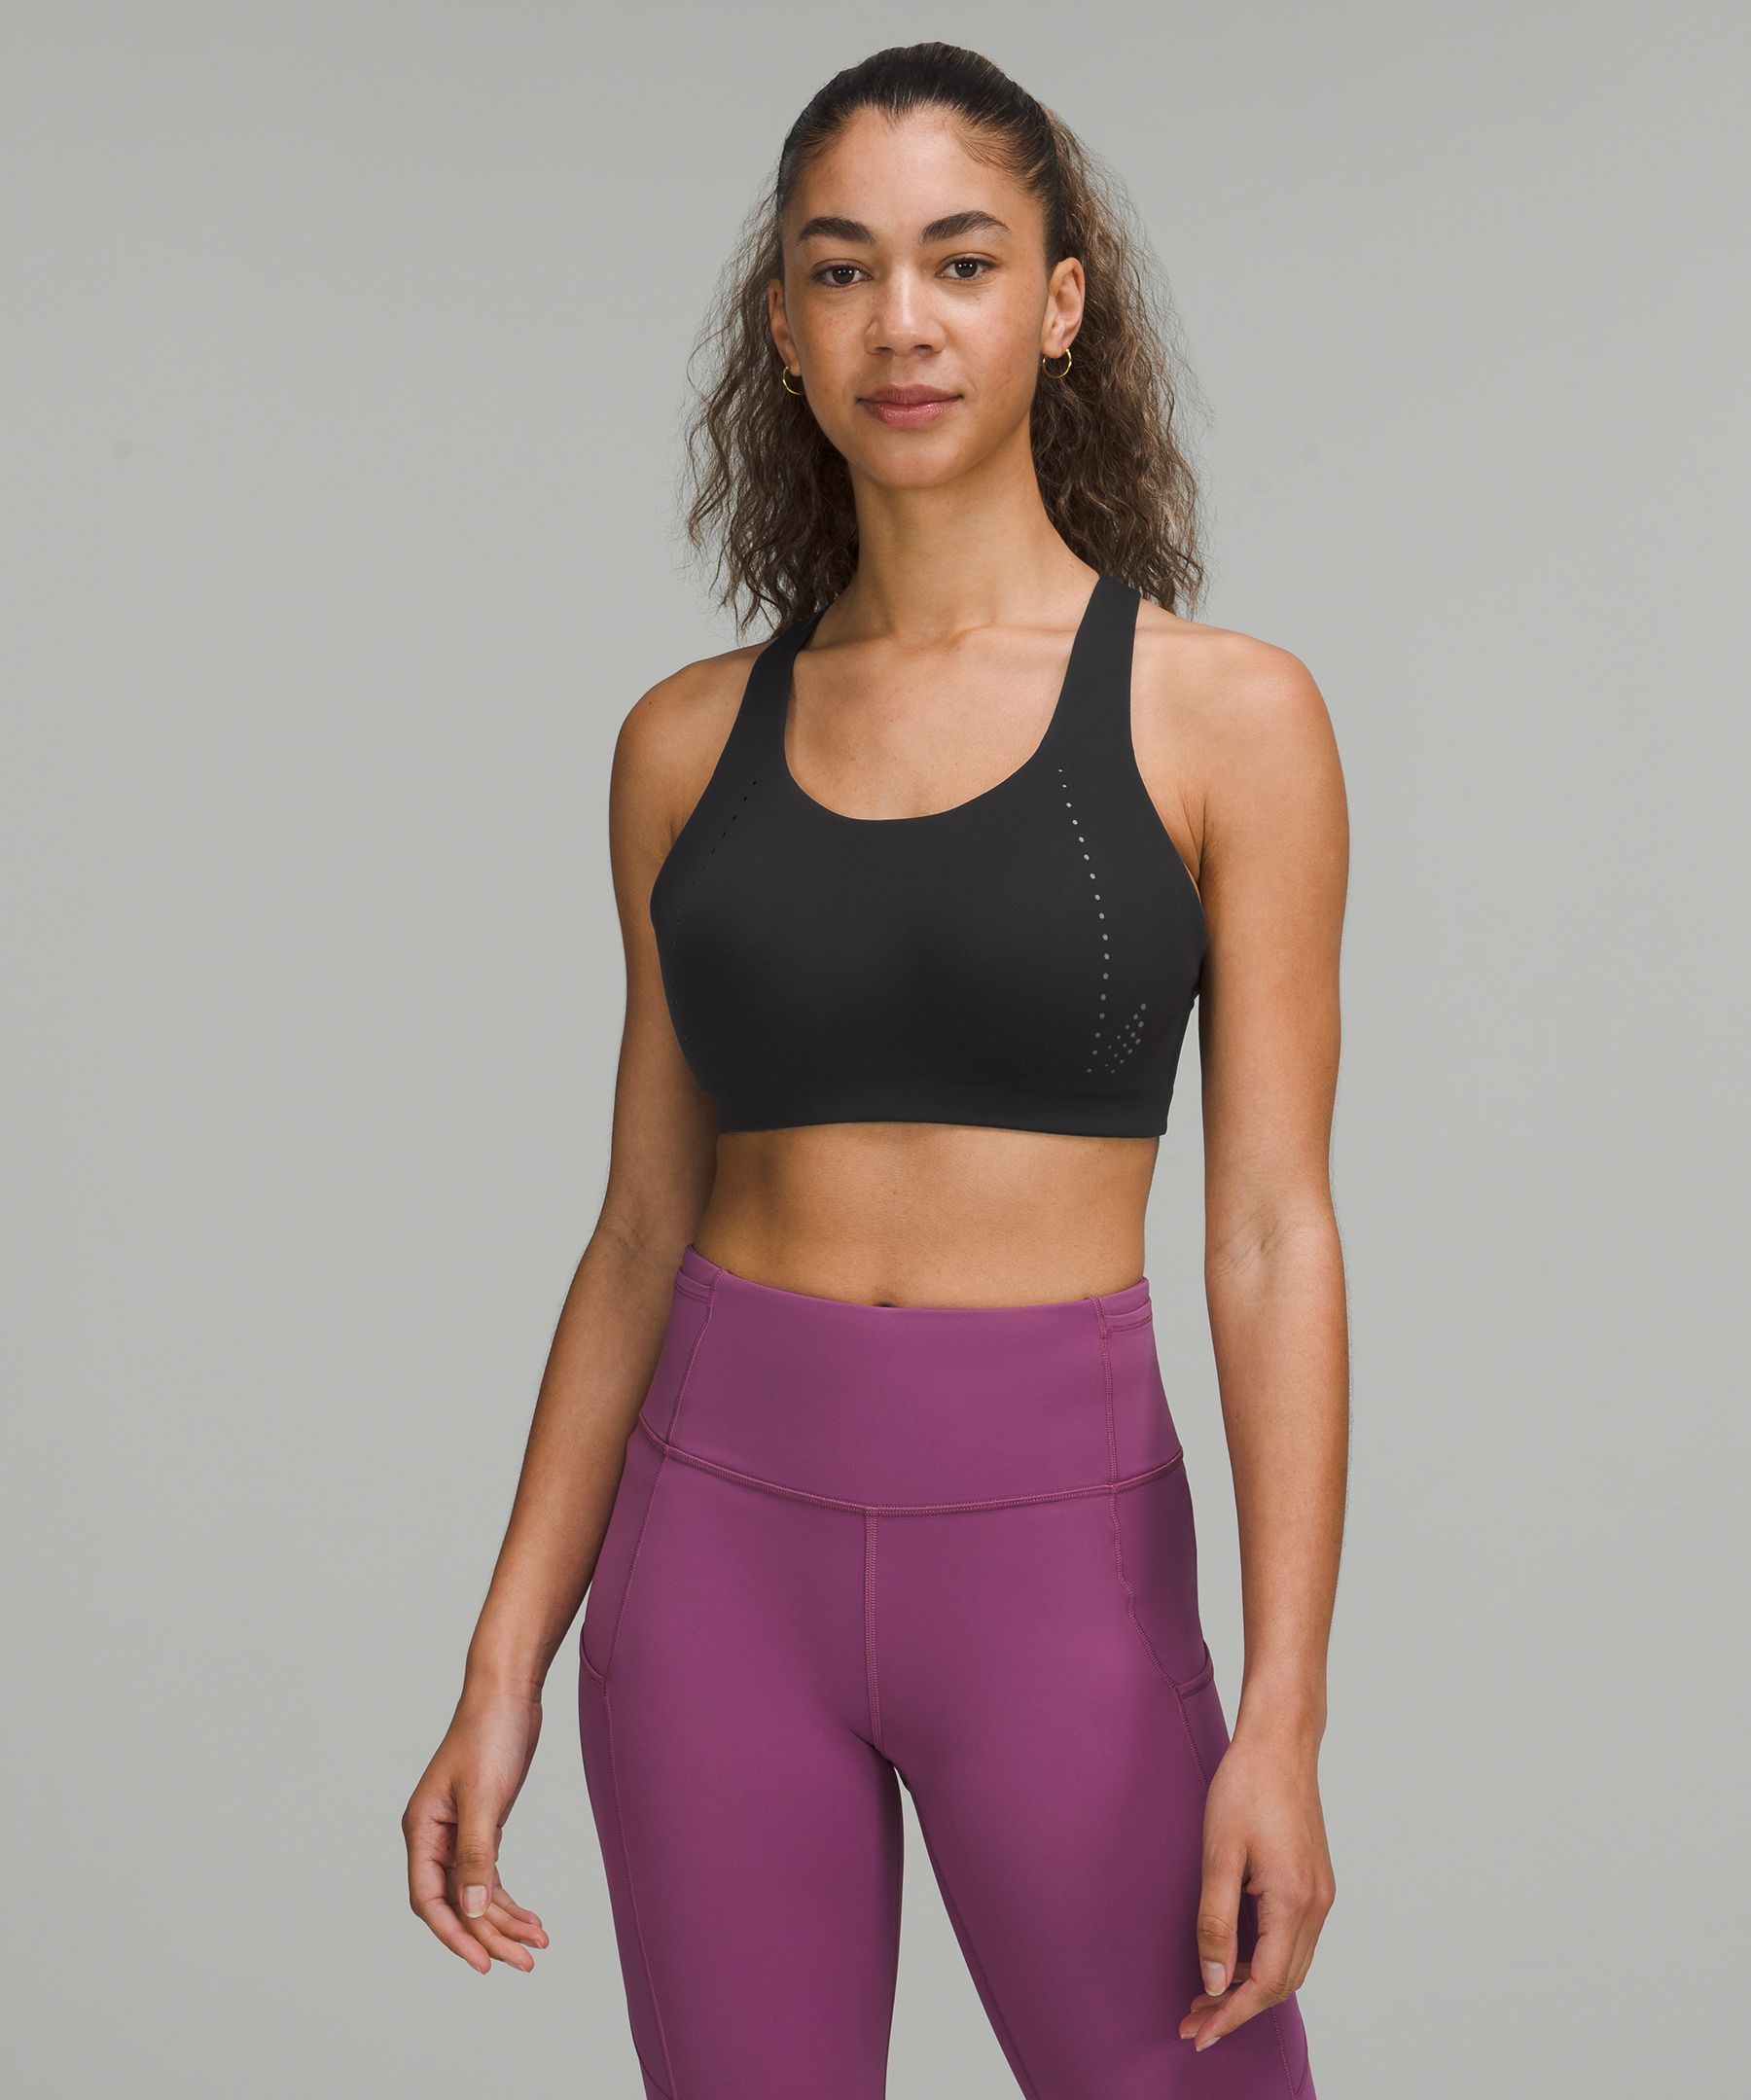 High Support & High Impact Sports Bras